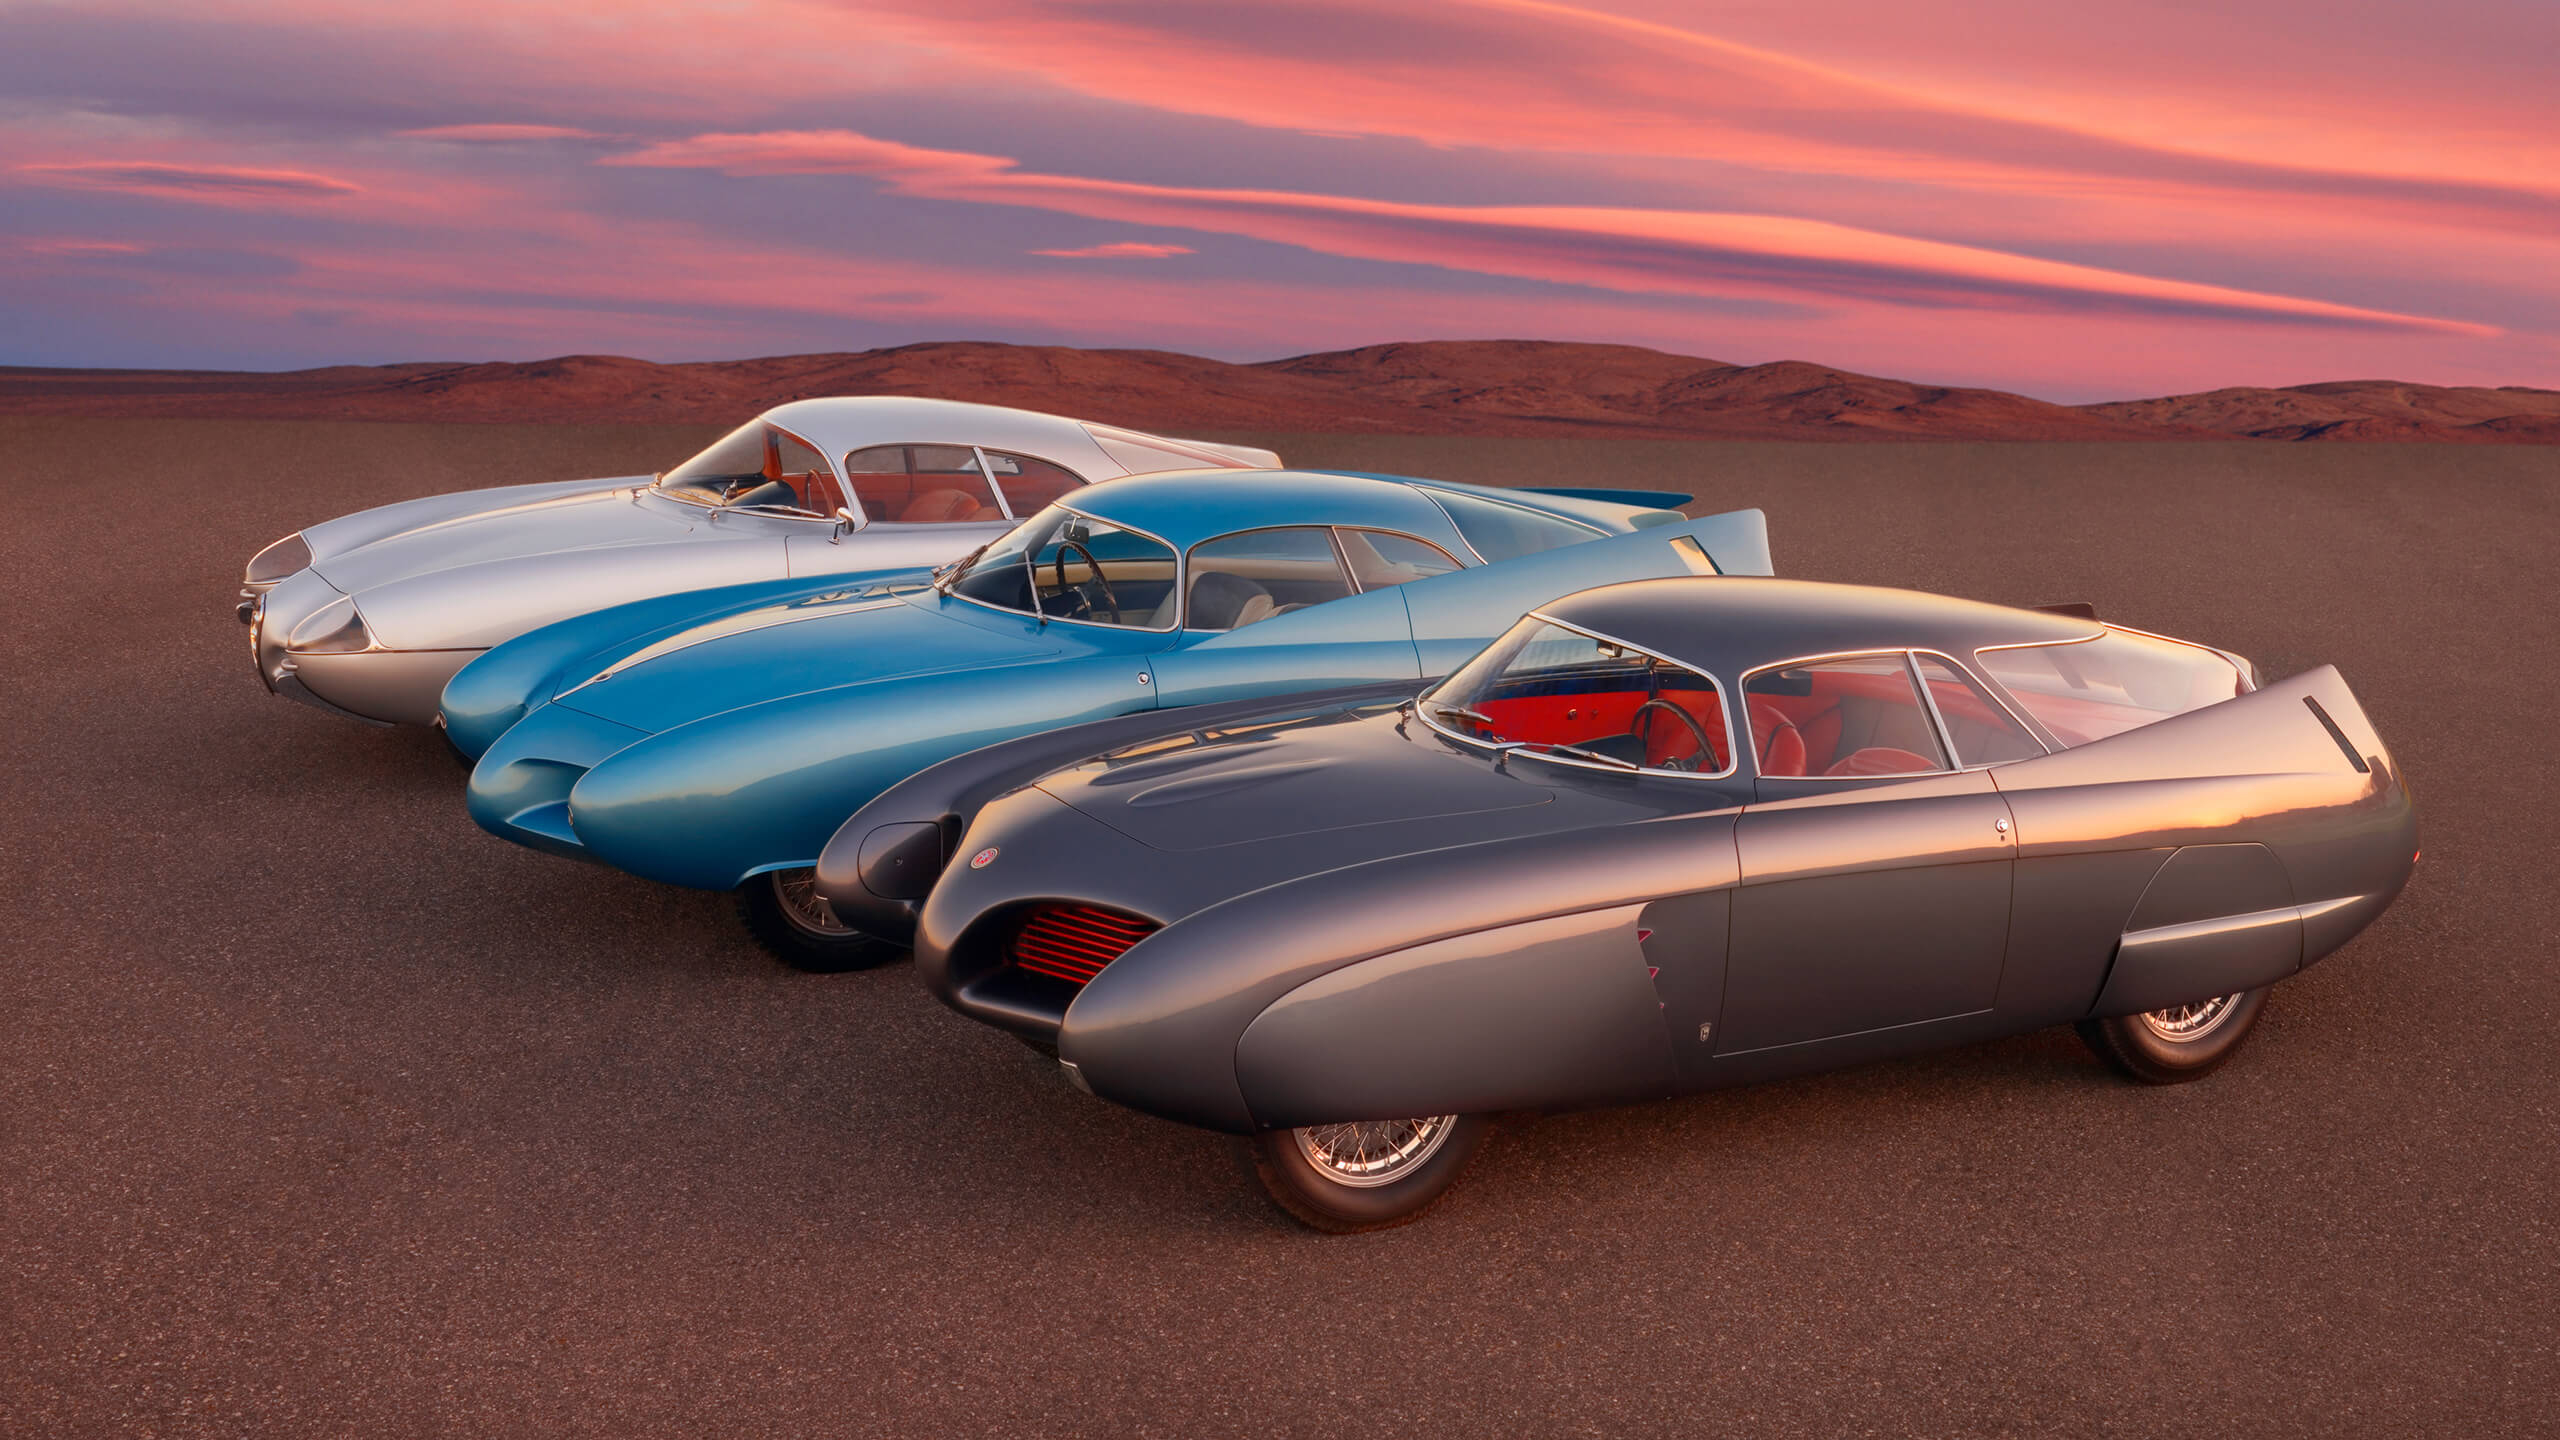 B.A.T. cars triptych sells for $14.8m